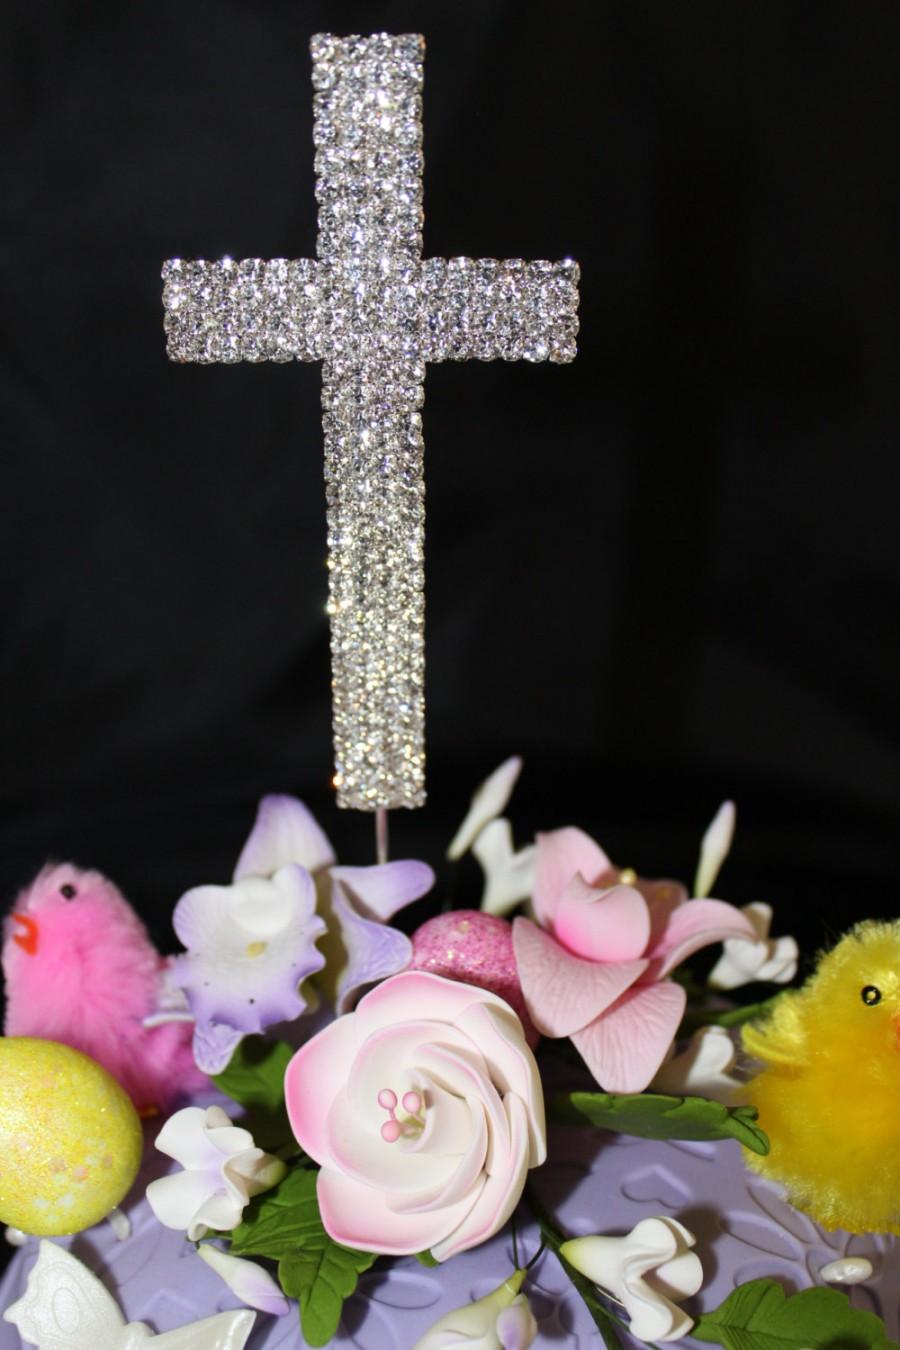 Mariage - CROSS CAKE TOPPER Rhinestone Cross, various styles,Floral Stick - Great for Baptisms,Communion, Easter, Weddings, Holidays 5"Cross,Total 10"